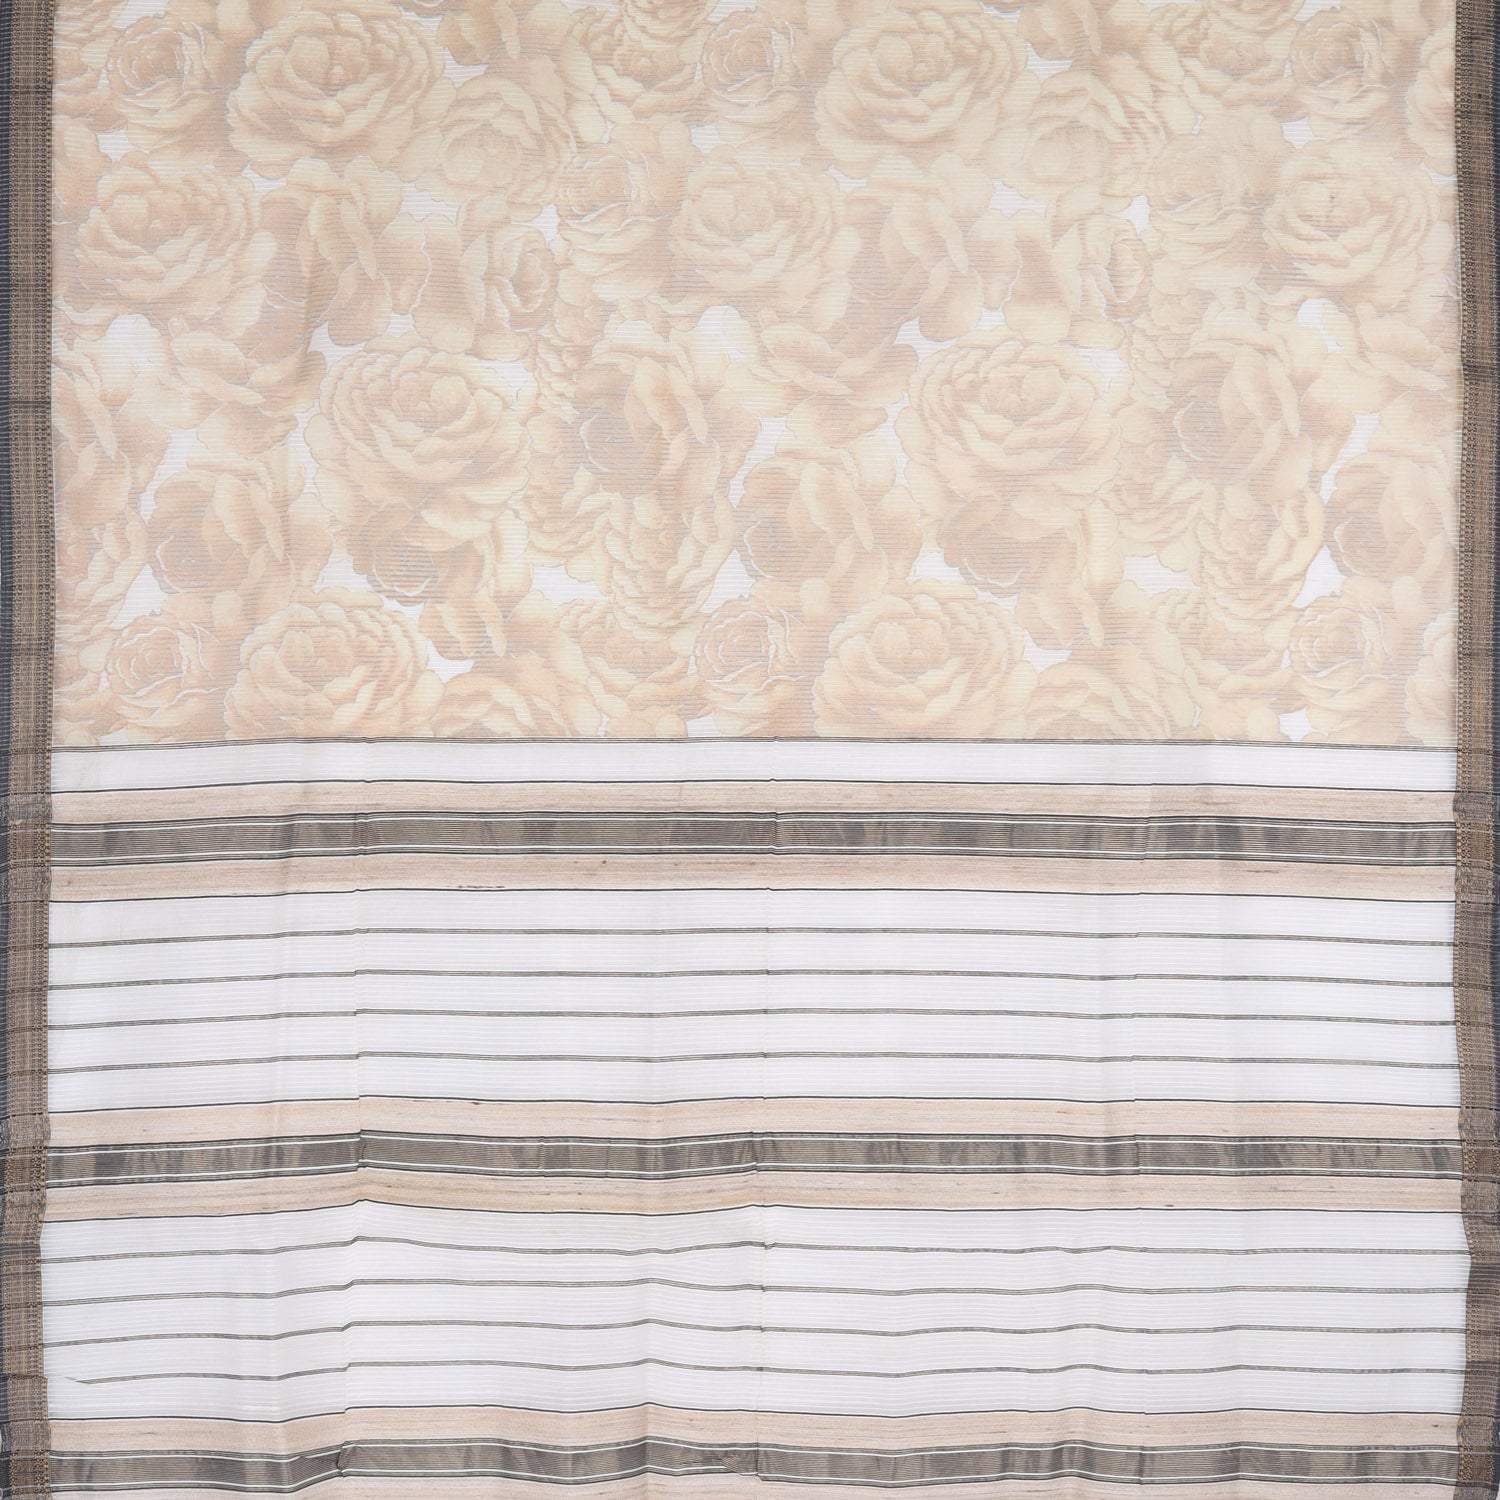 Pastel Brown Cotton Saree With Floral Printed Motifs - Singhania's